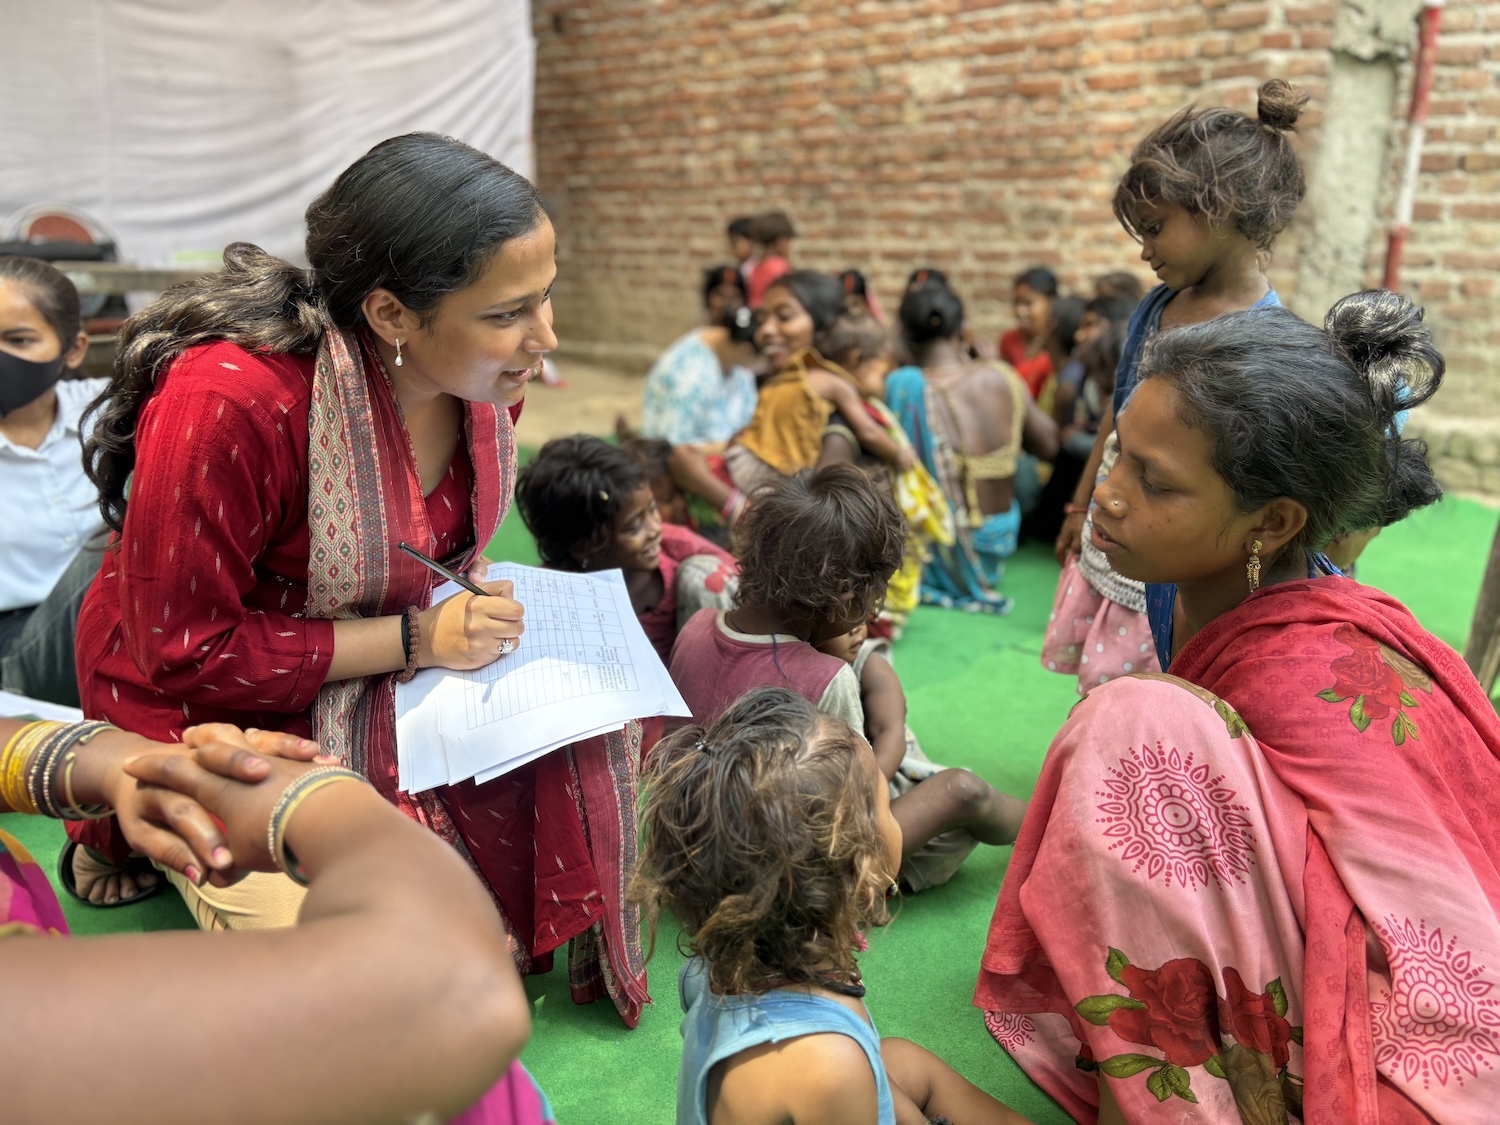 A woman in traditional attire is discussing the Period Awareness Drive with a seated woman and children outdoors. She is holding a paper and pen, seemingly taking notes, amidst a group of people, including children, in the background. This initiative is supported by GPF India to promote sustainable solutions.